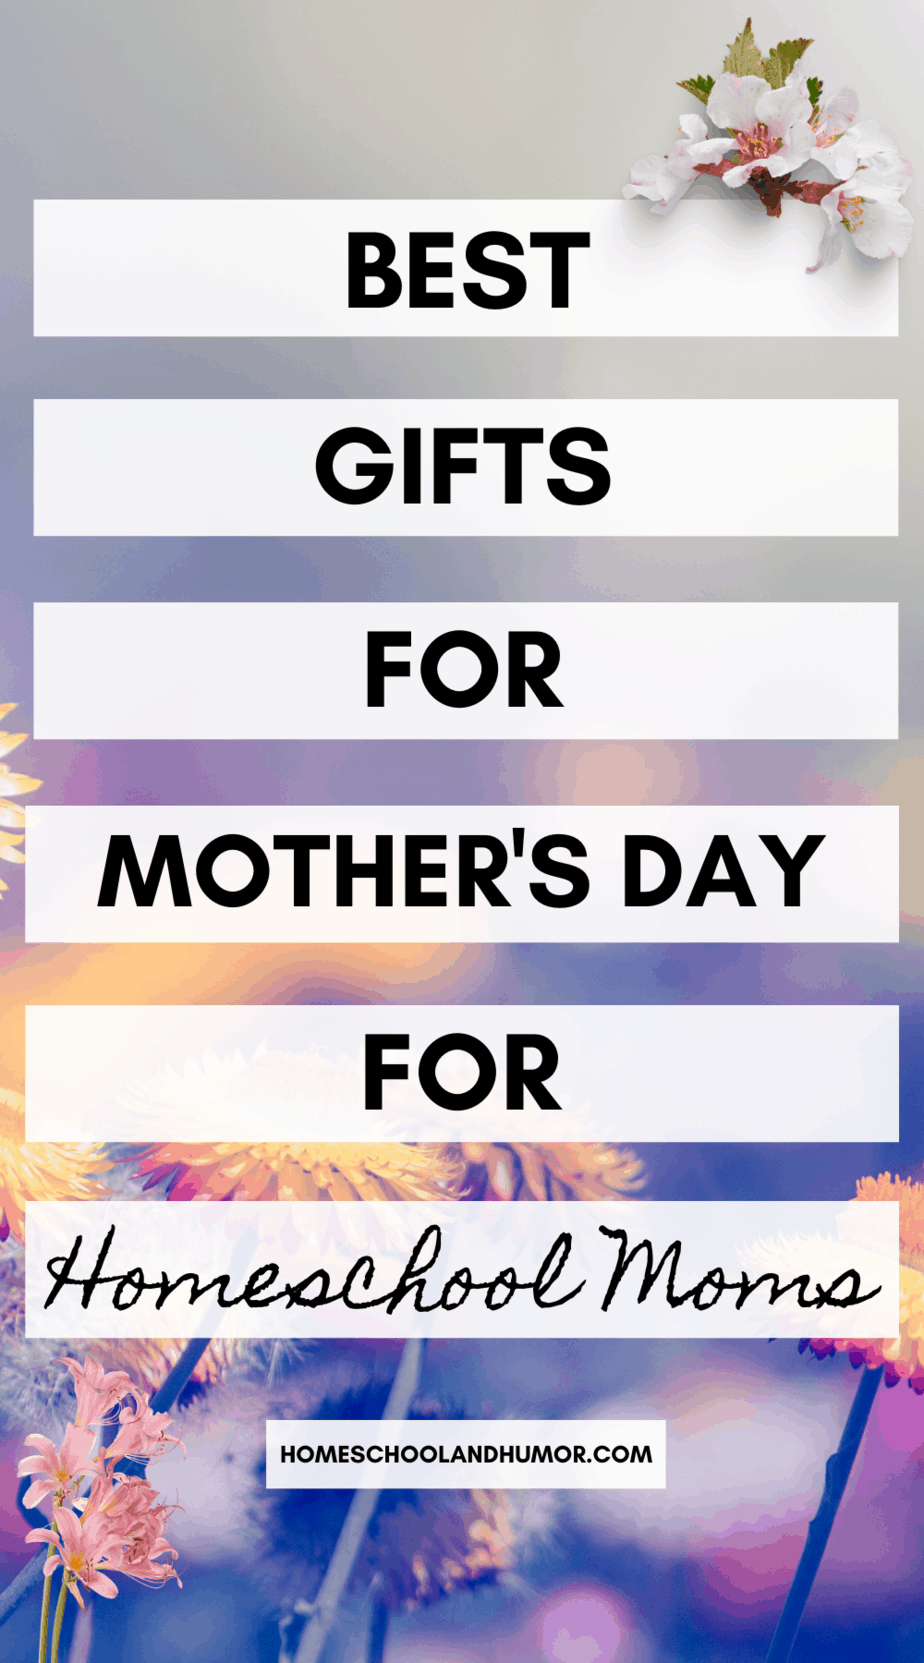 The Best Gifts for Homeschool Moms To Make Her Life Easier (2021)